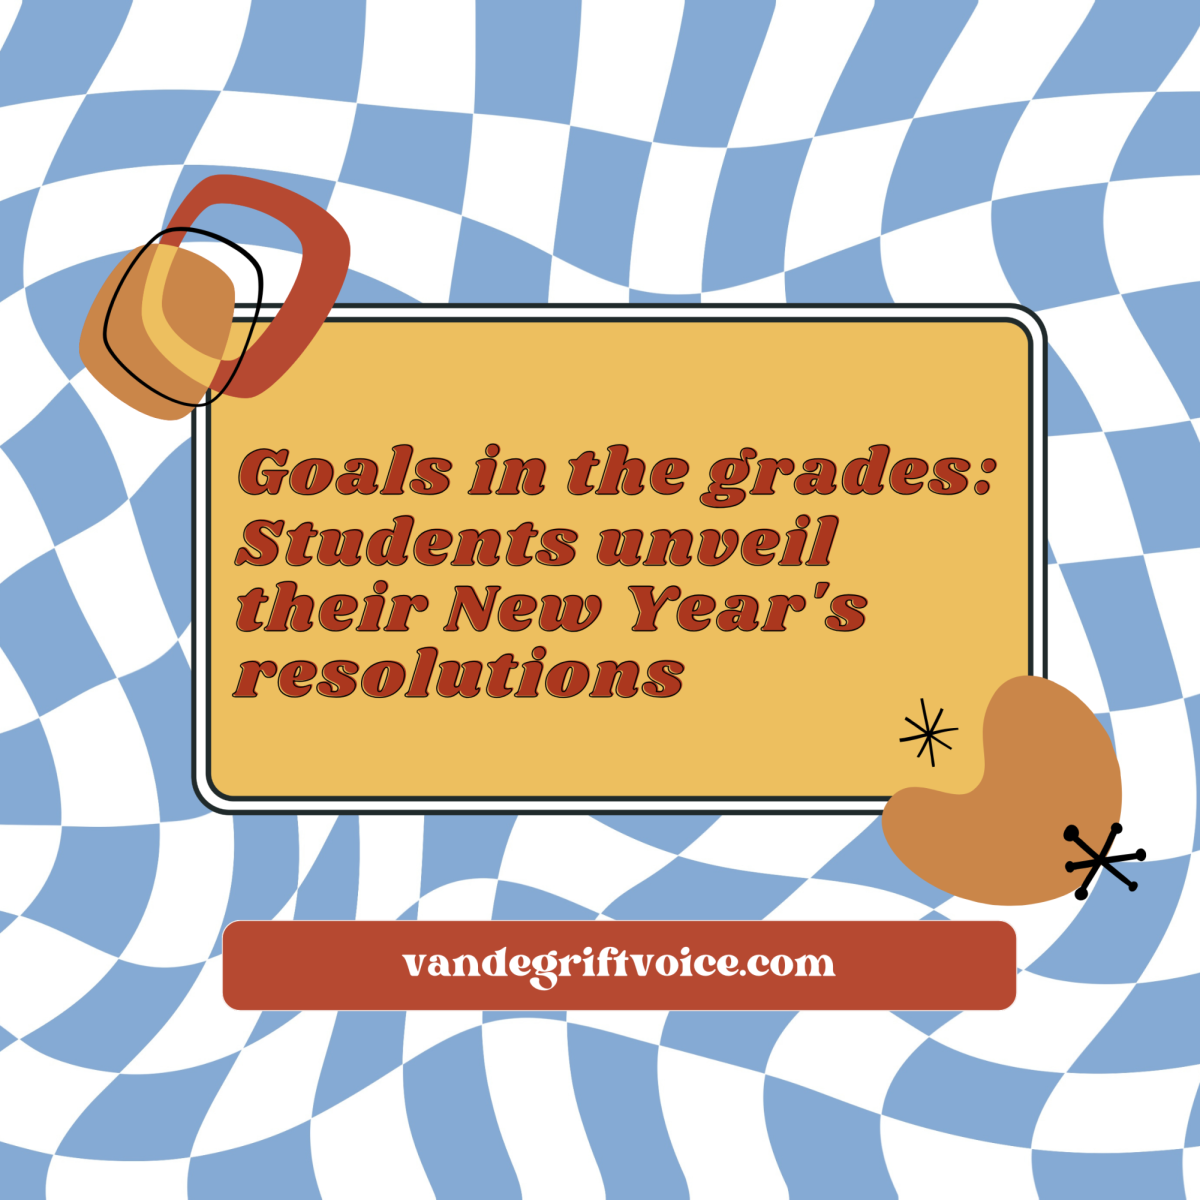 Goals+in+the+grades%3A+Students+unveil+their+New+Years+resolutions